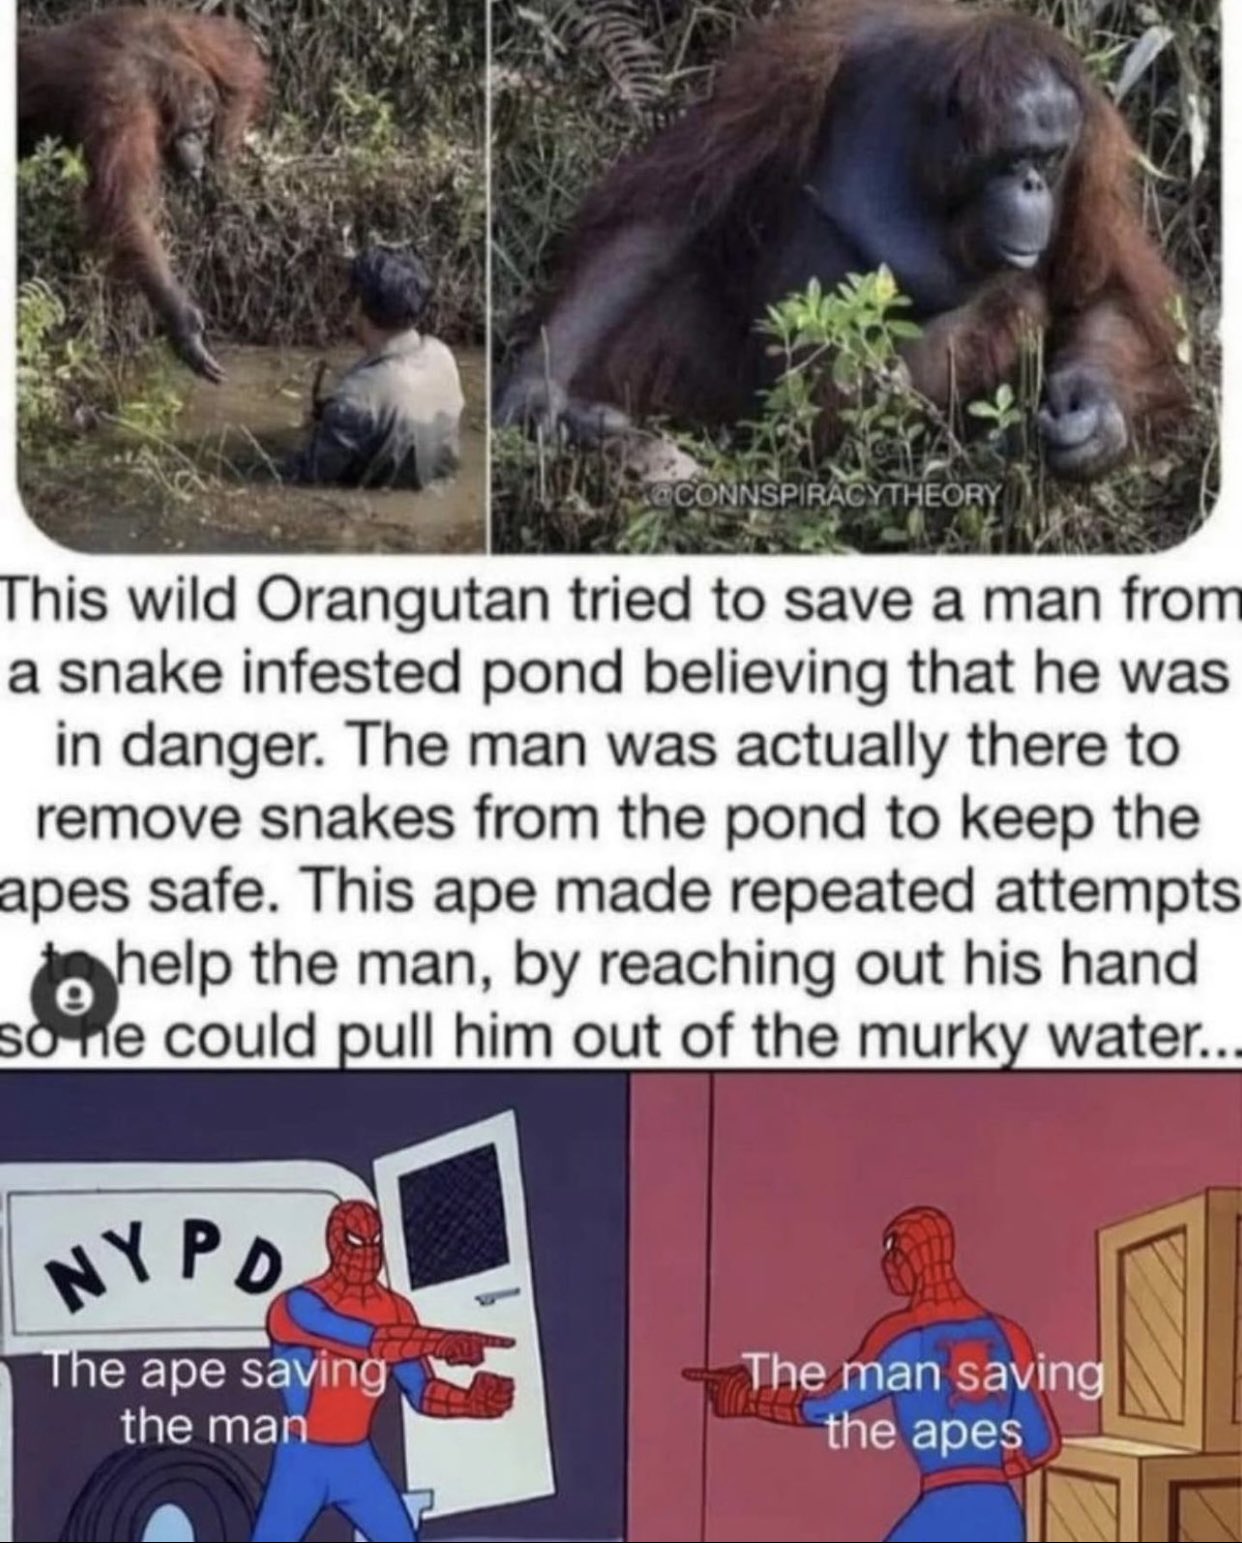 dudes posting their Ws - fauna - Connspiracytheory This wild Orangutan tried to save a man from a snake infested pond believing that he was in danger. The man was actually there to remove snakes from the pond to keep the apes safe. This ape made repeated 